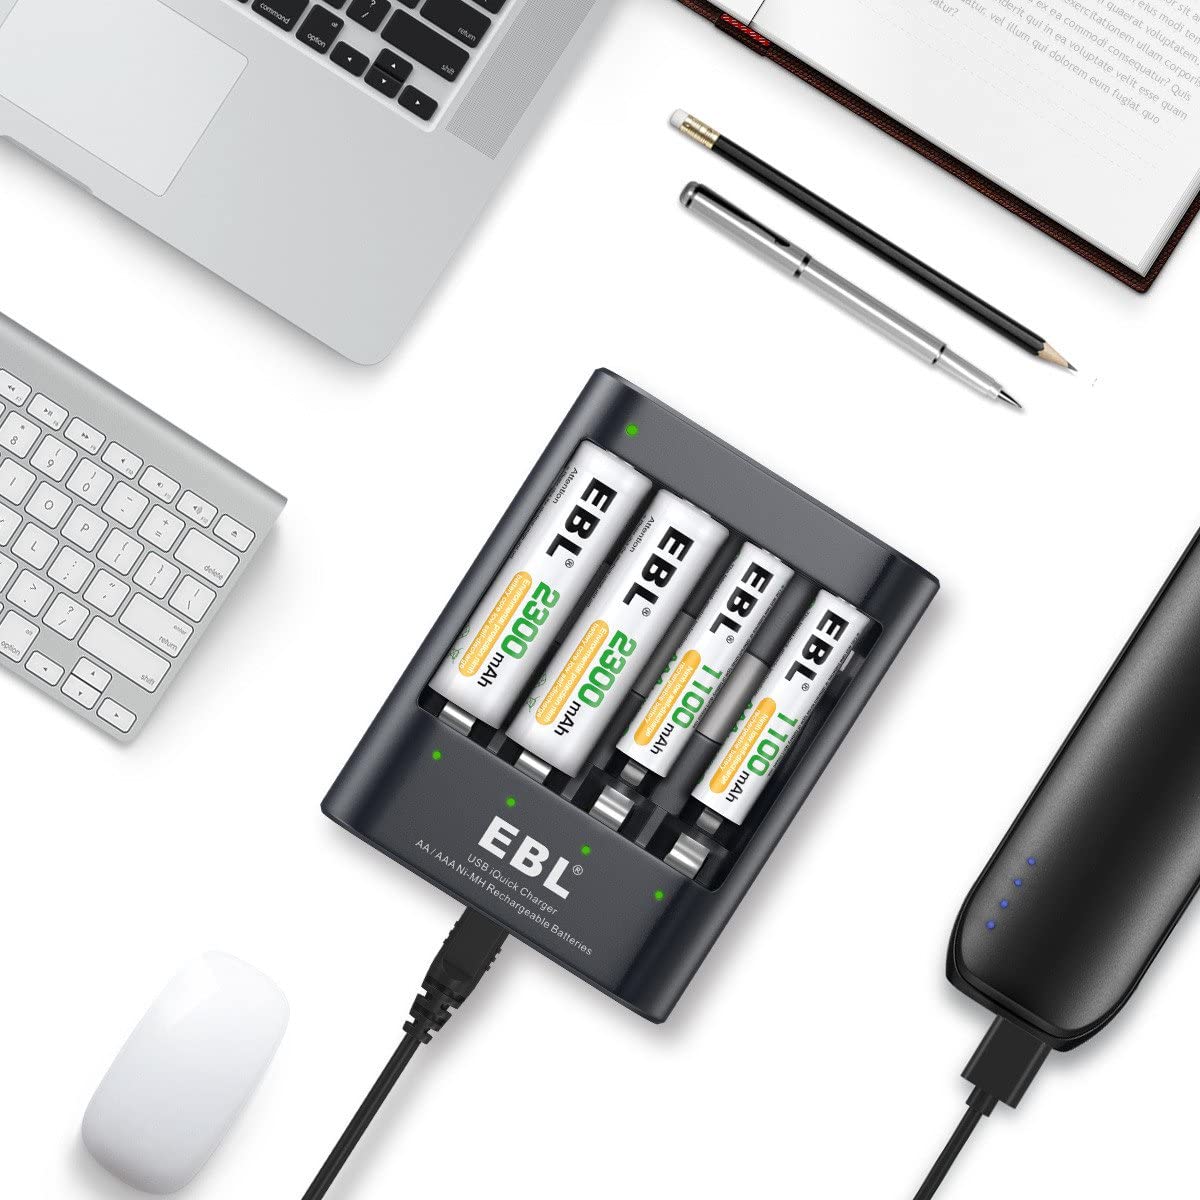 EBL LN-6454 iQuick Fast Charging Battery Charger with Built in Overcharging Protection, LED Status Indicator Lights, and Micro USB Input Port for AA and AAA Rechargeable Batteries